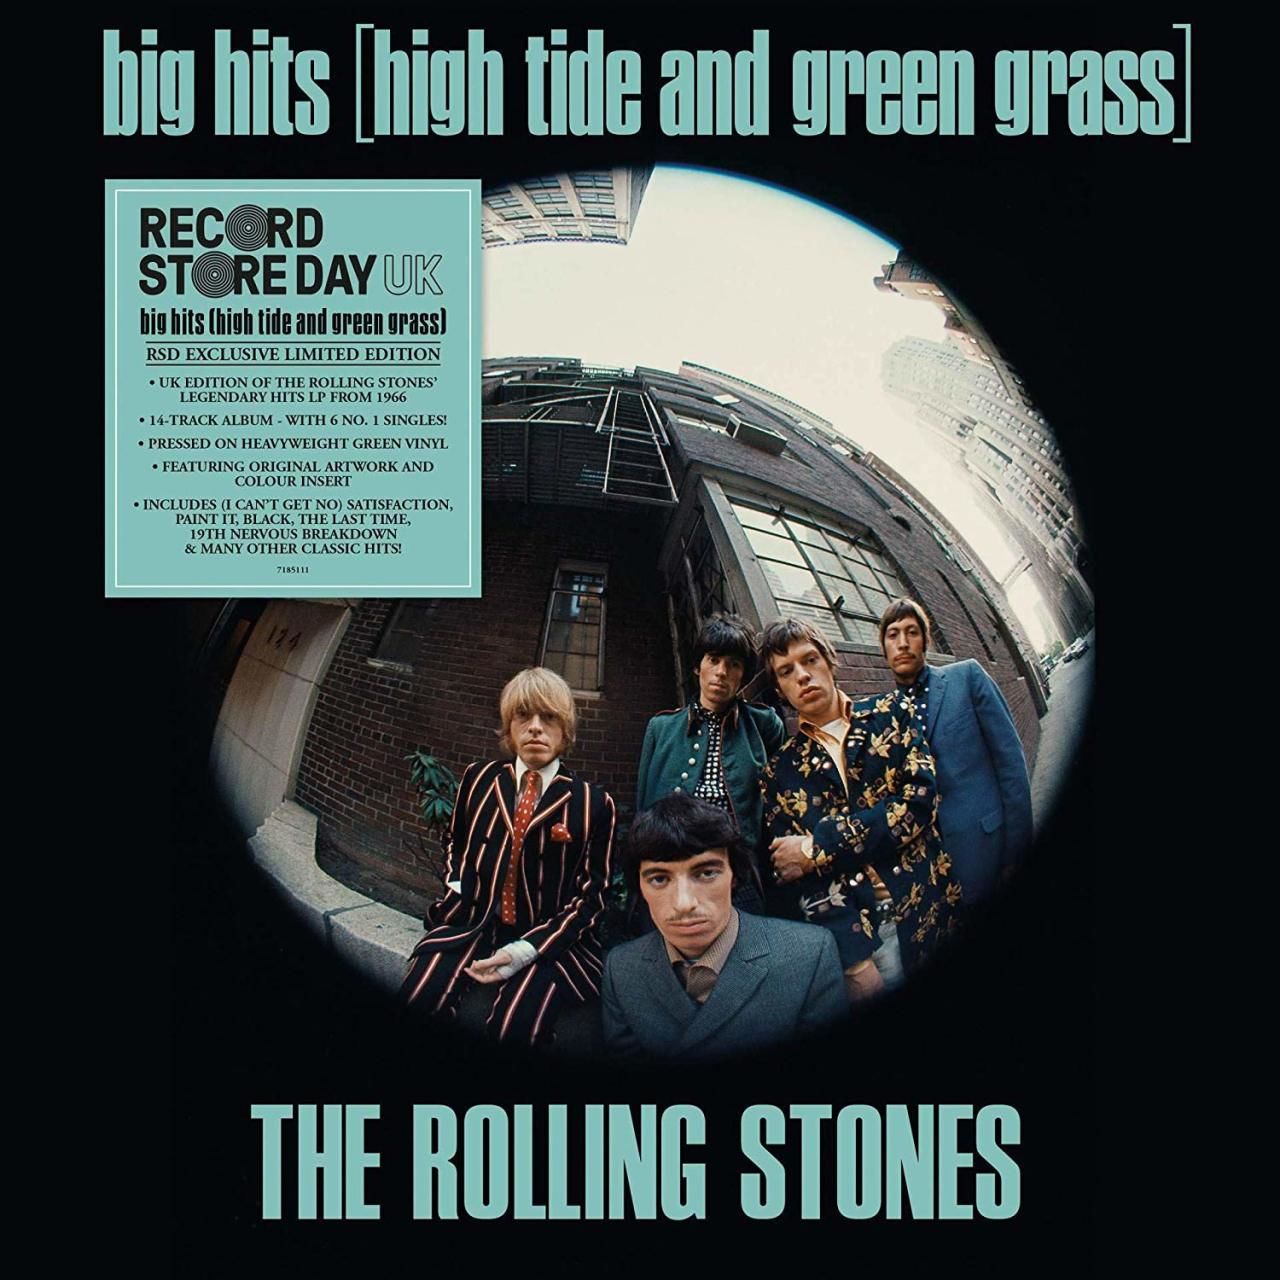 THE ROLLING STONES - BIG HITS (HIGH TIDE & GREE